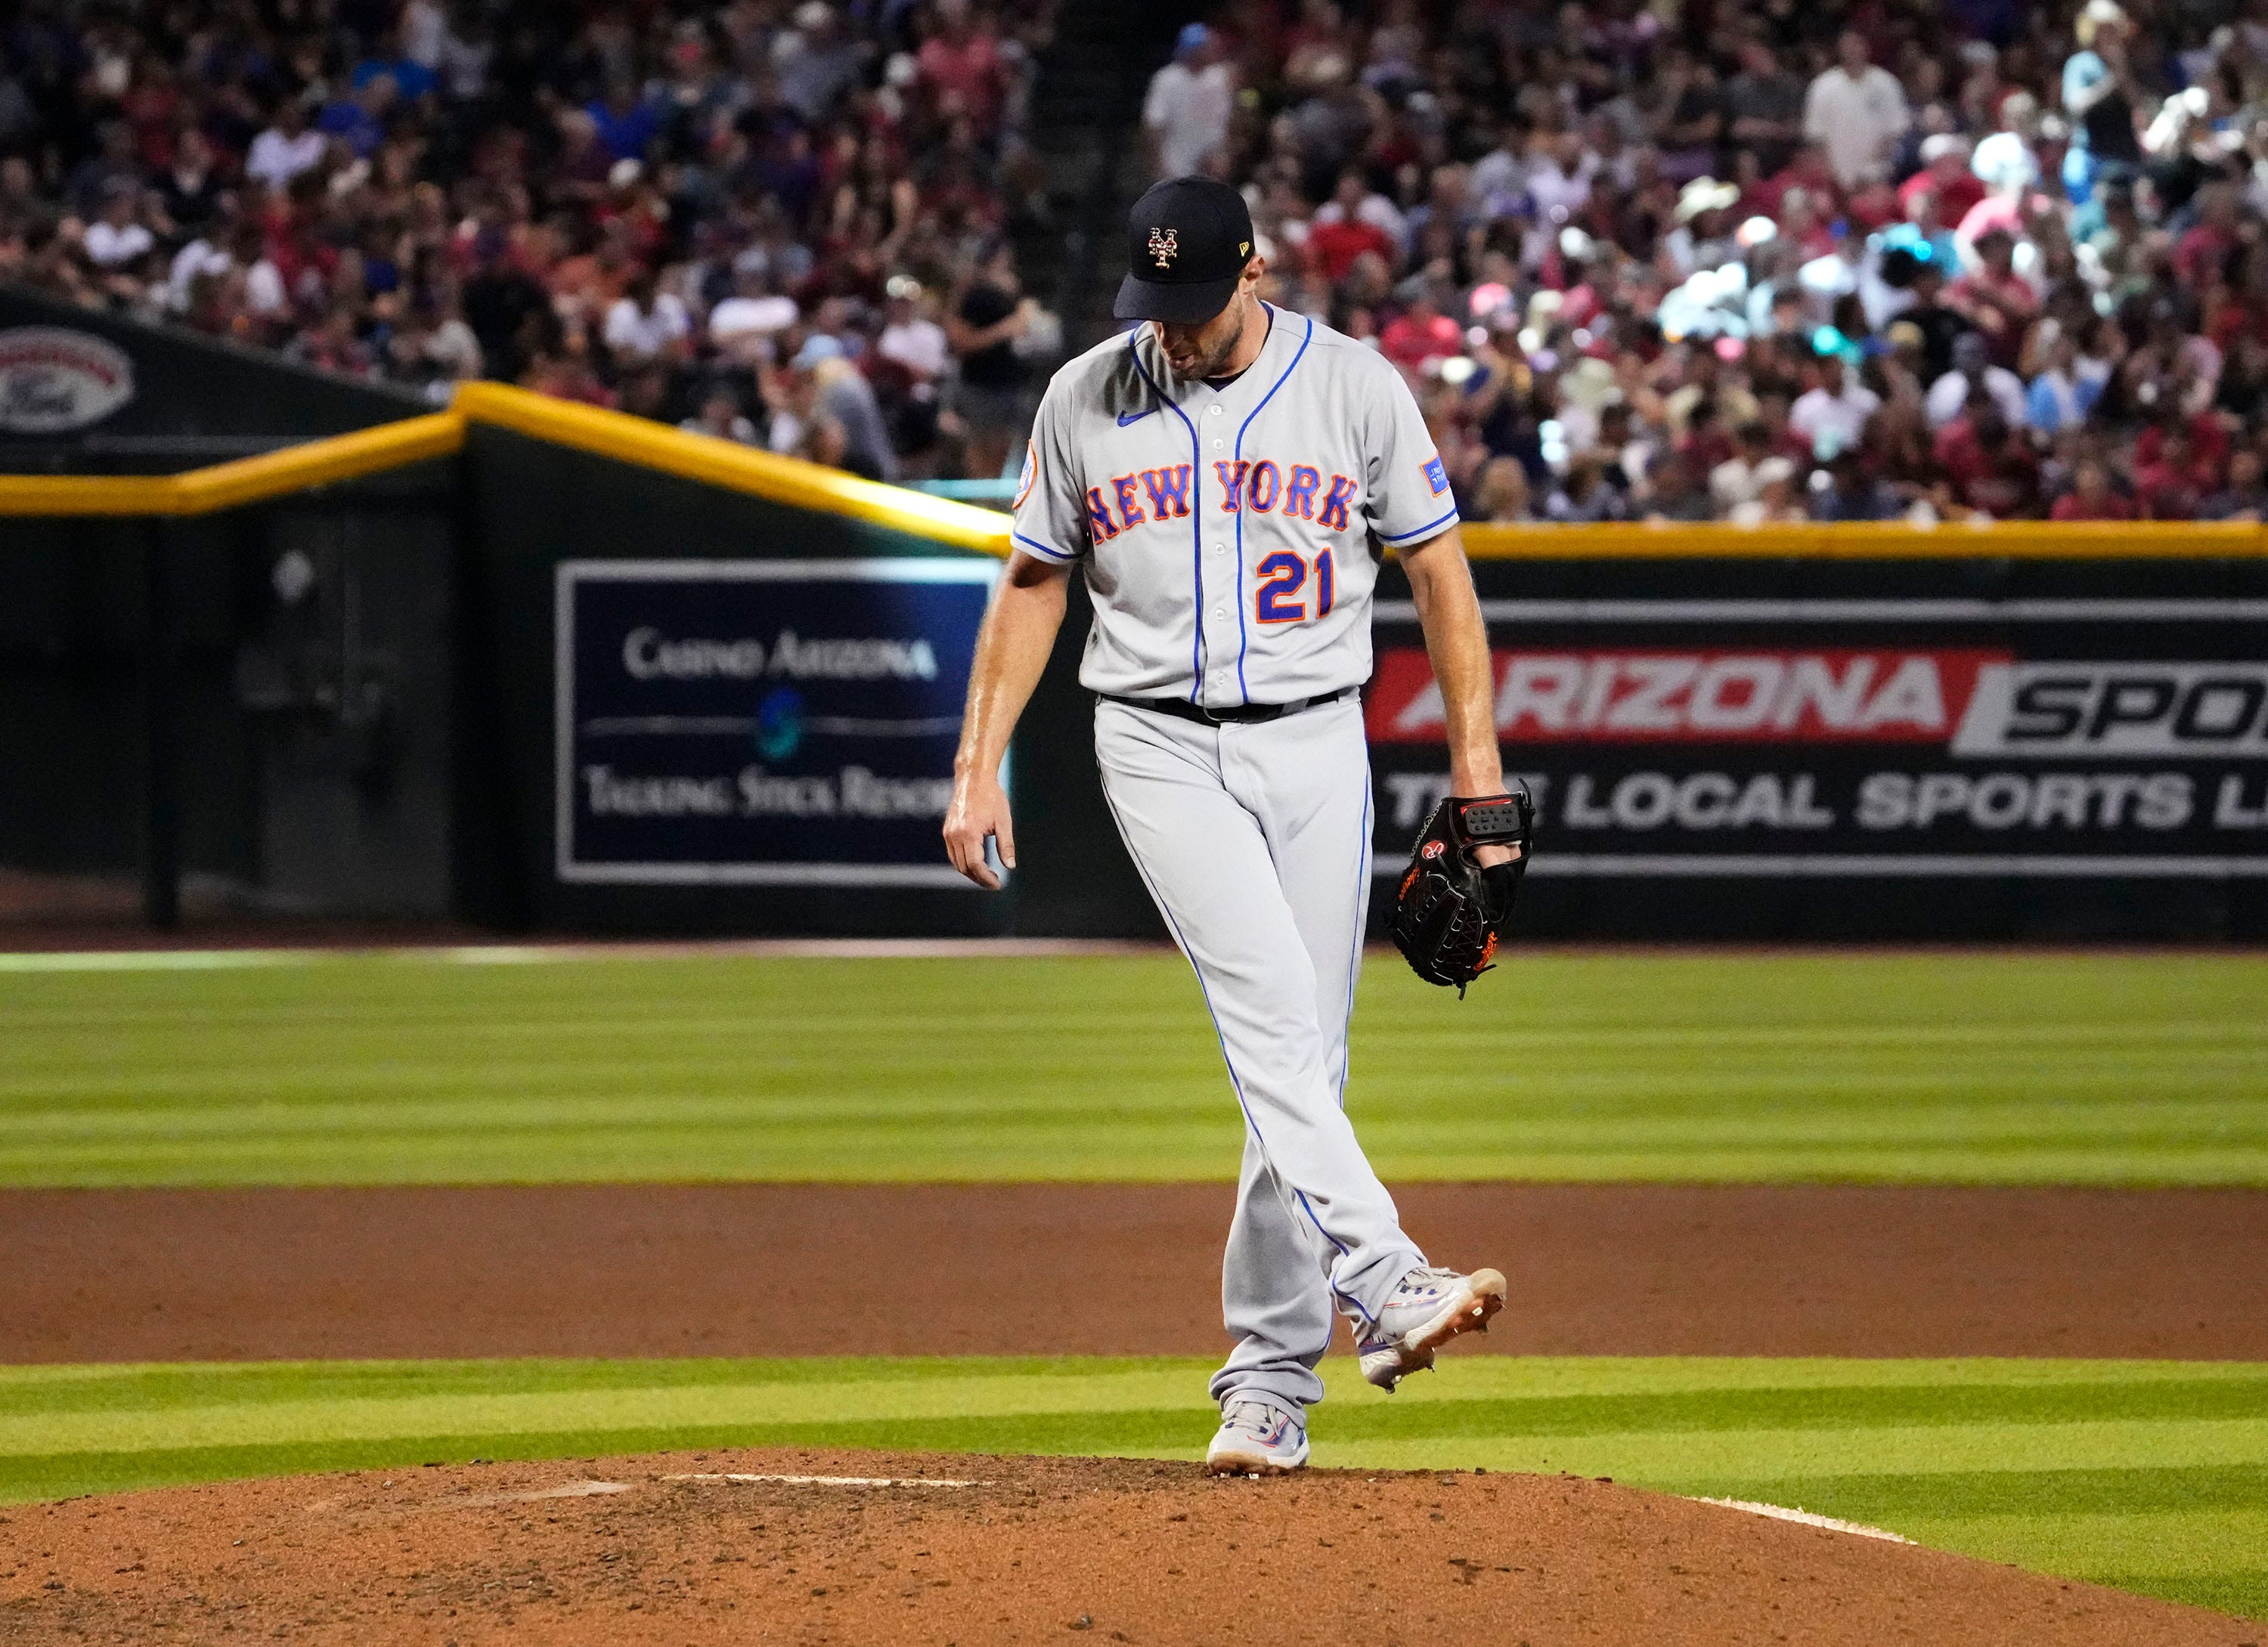 This New York Mets Pitcher Just Provoked The Yankees and Fans